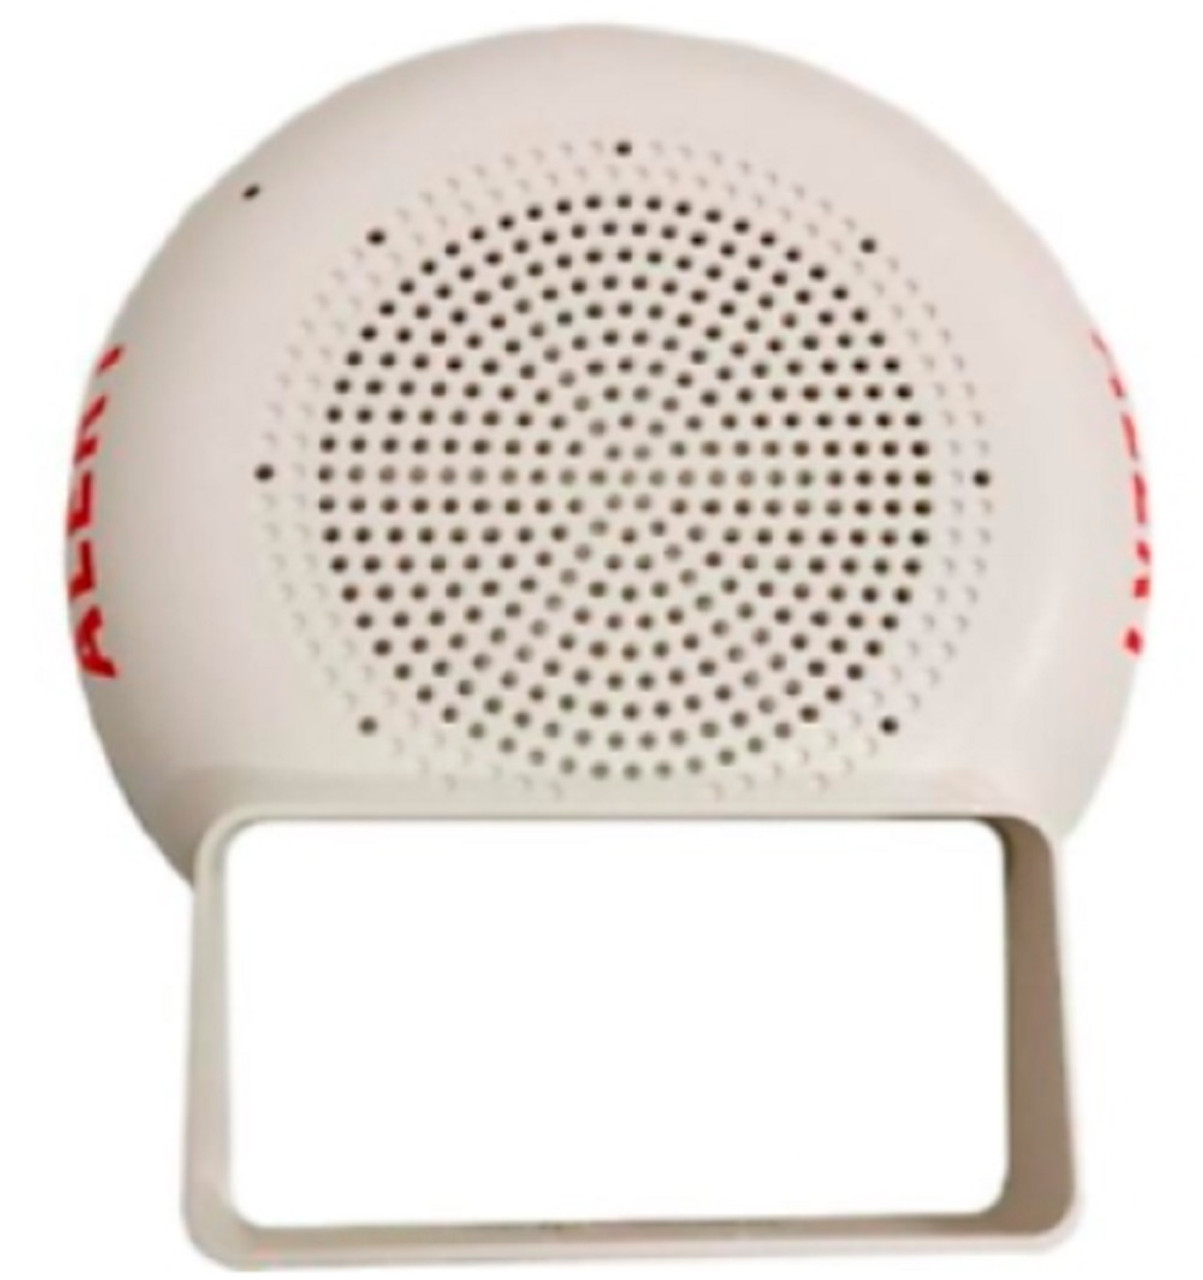 Simplex Grinnell 49SVC-CWFIRE S/V Cover, APPLC Models, White, With FIRE Wording [New]